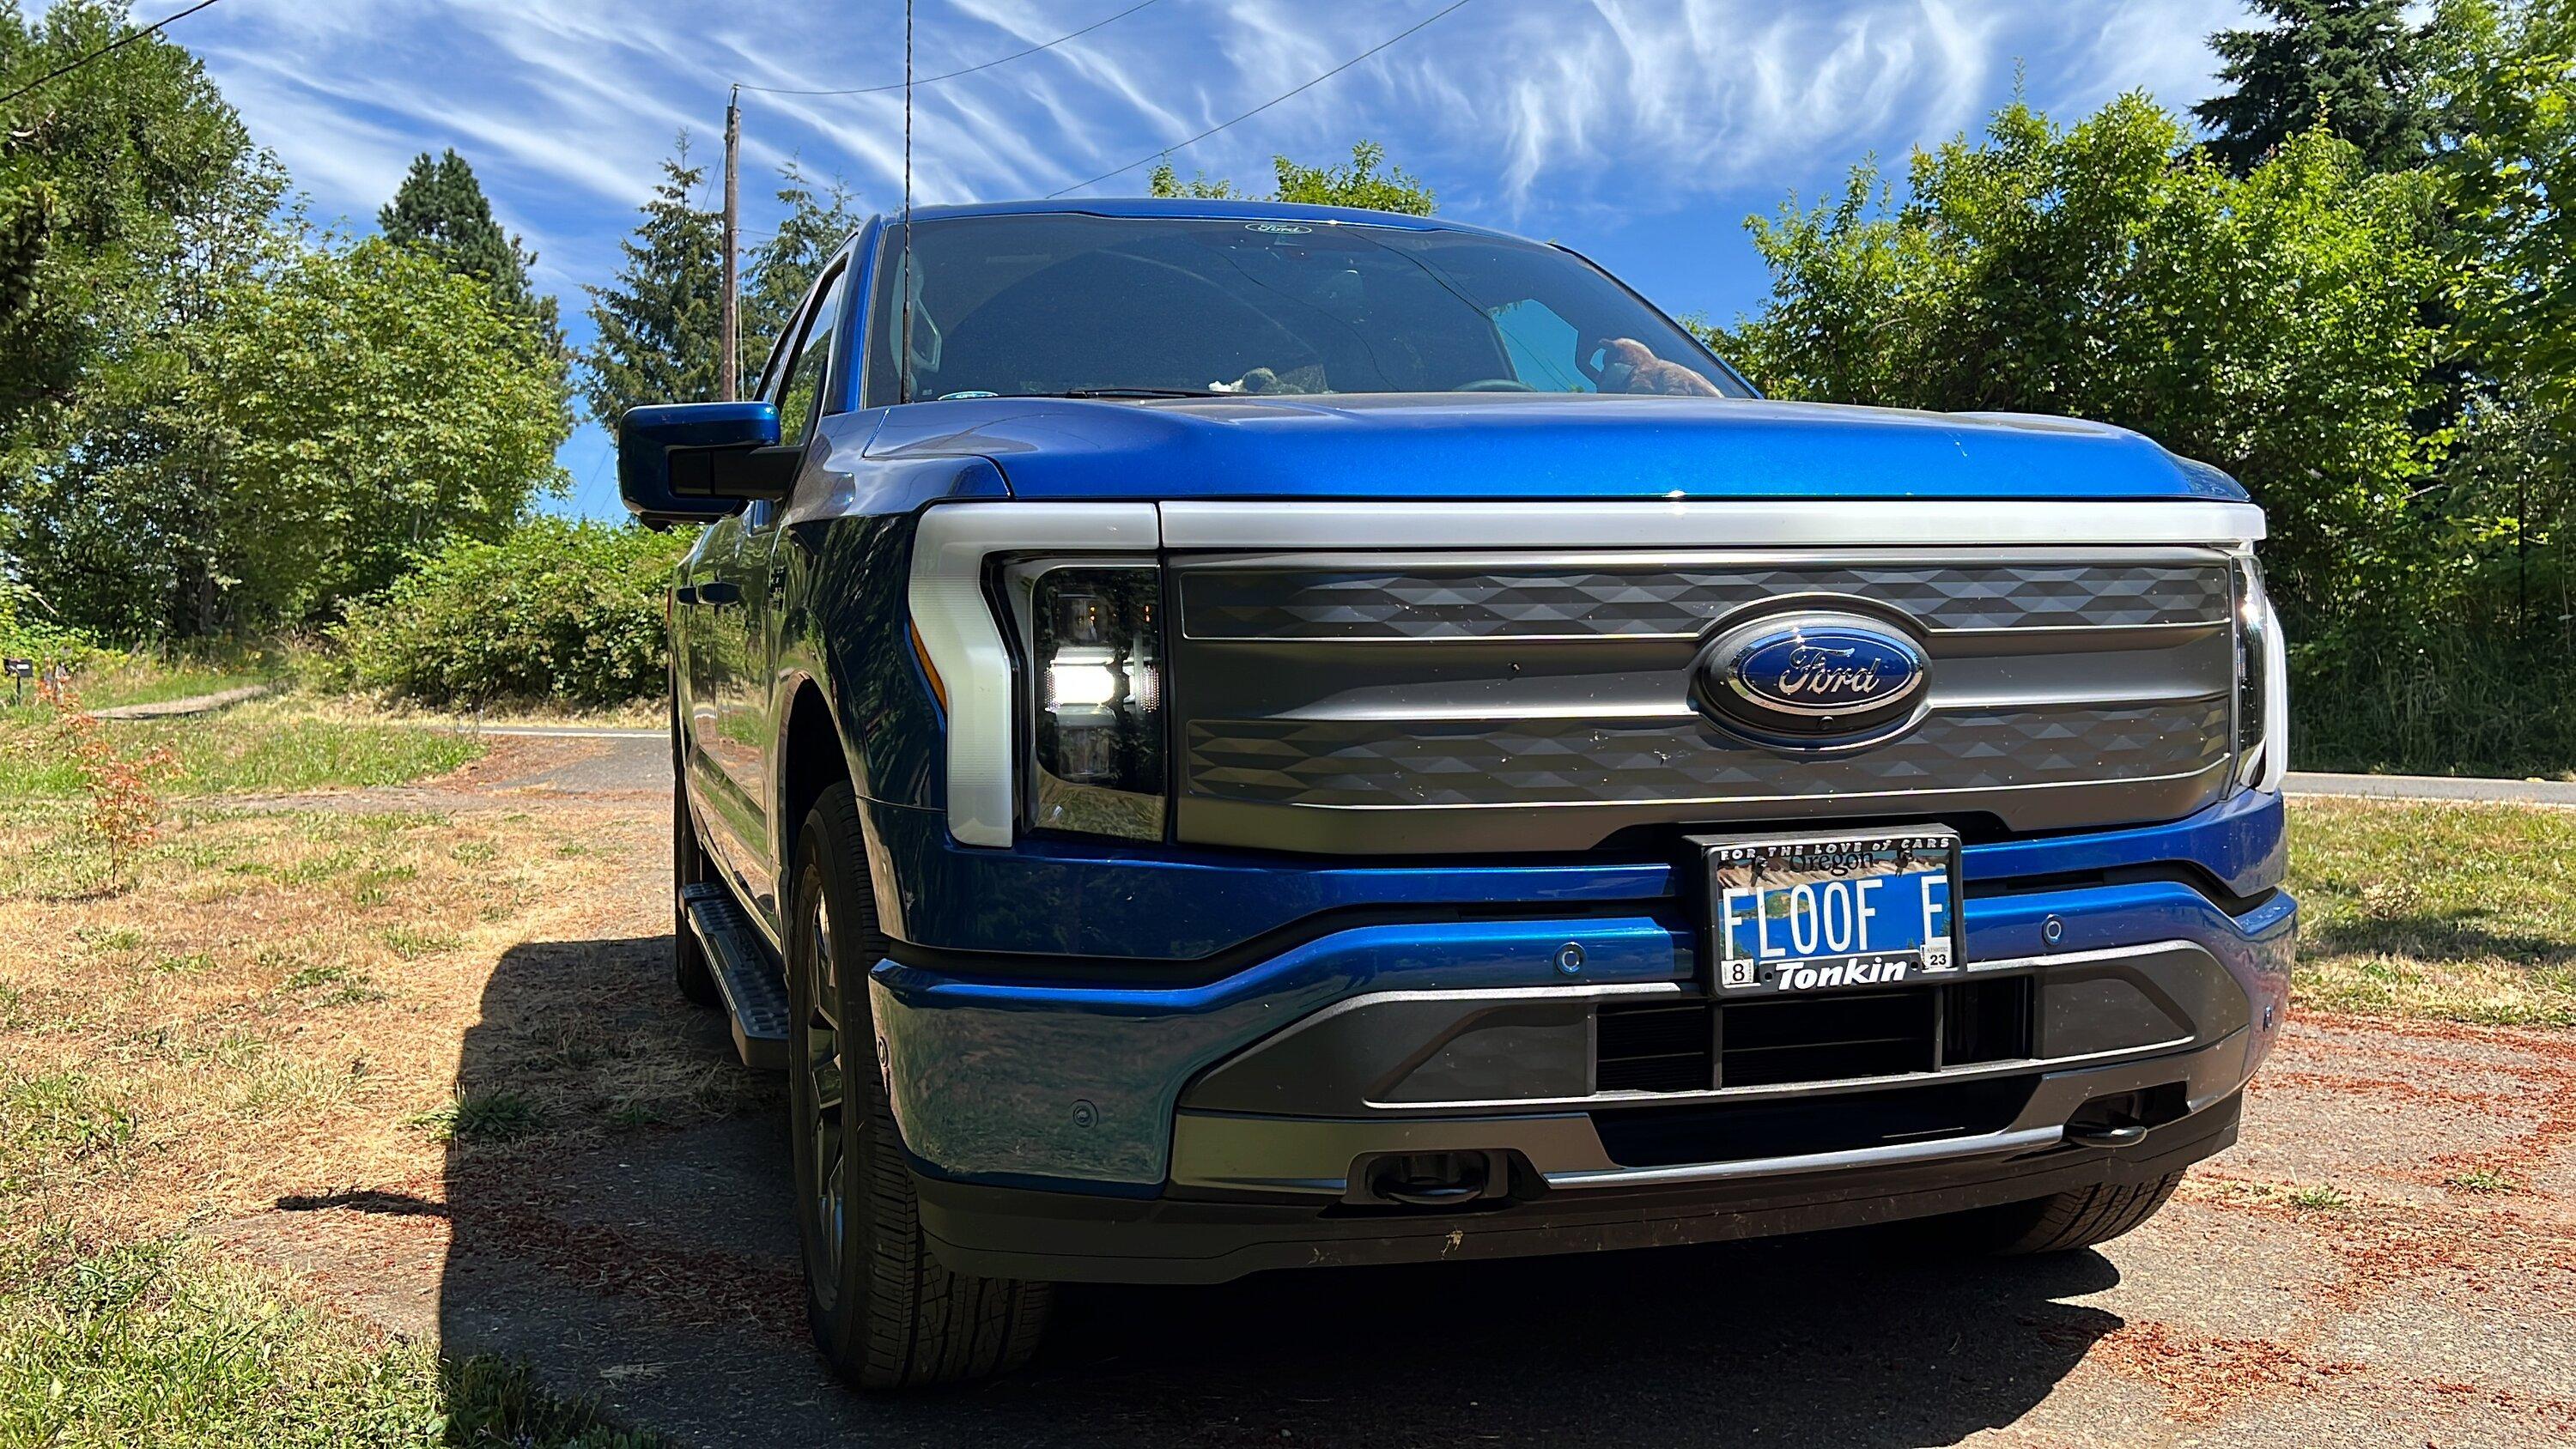 Ford F-150 Lightning Personalized vanity license plate ideas for your Lightning ? E59428E4-190E-4222-8BBF-9B689ECF4615